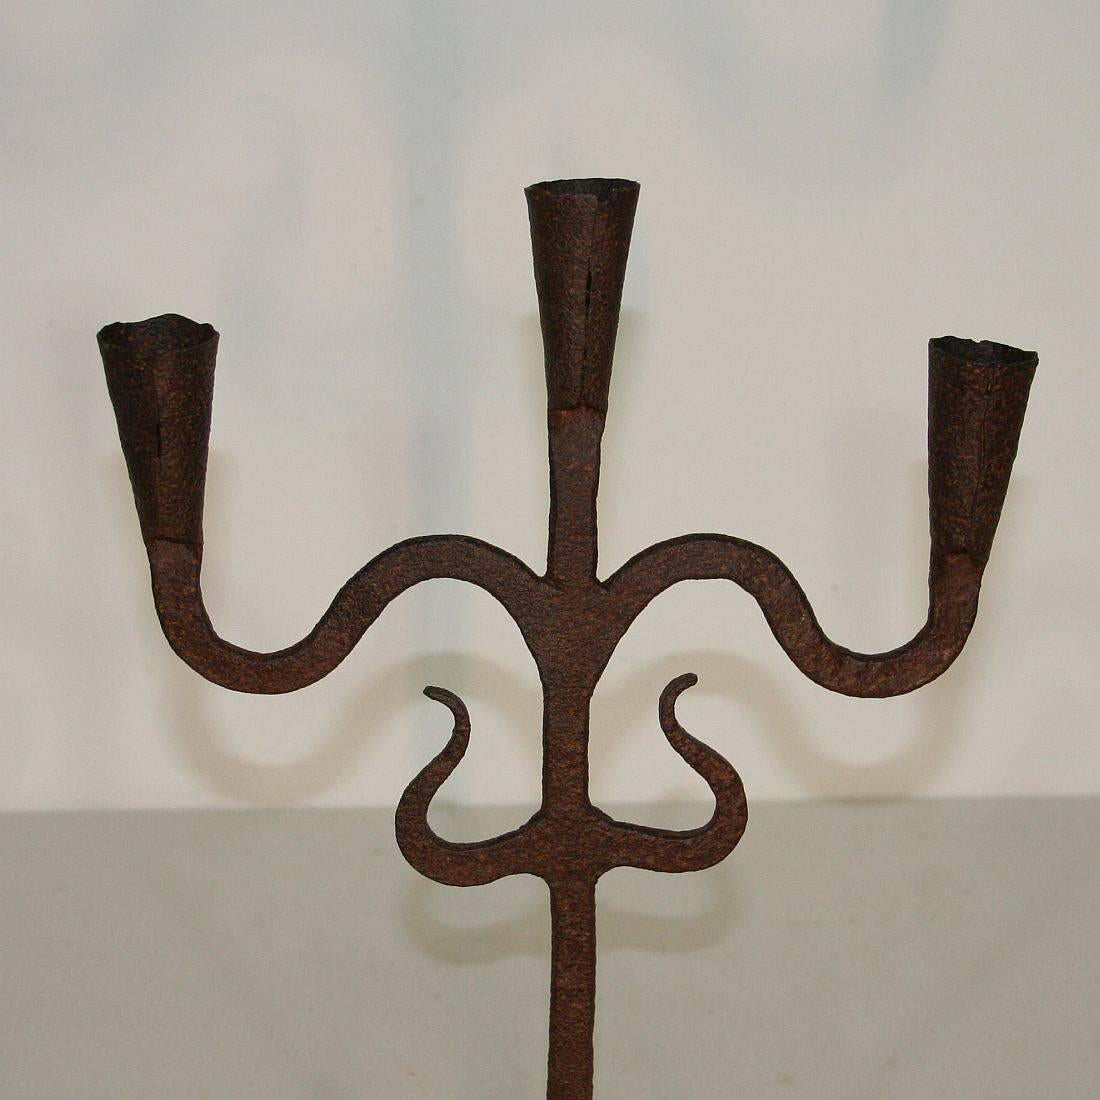 Spanish Pair of 18th Century Hand-Forged Iron Candleholders